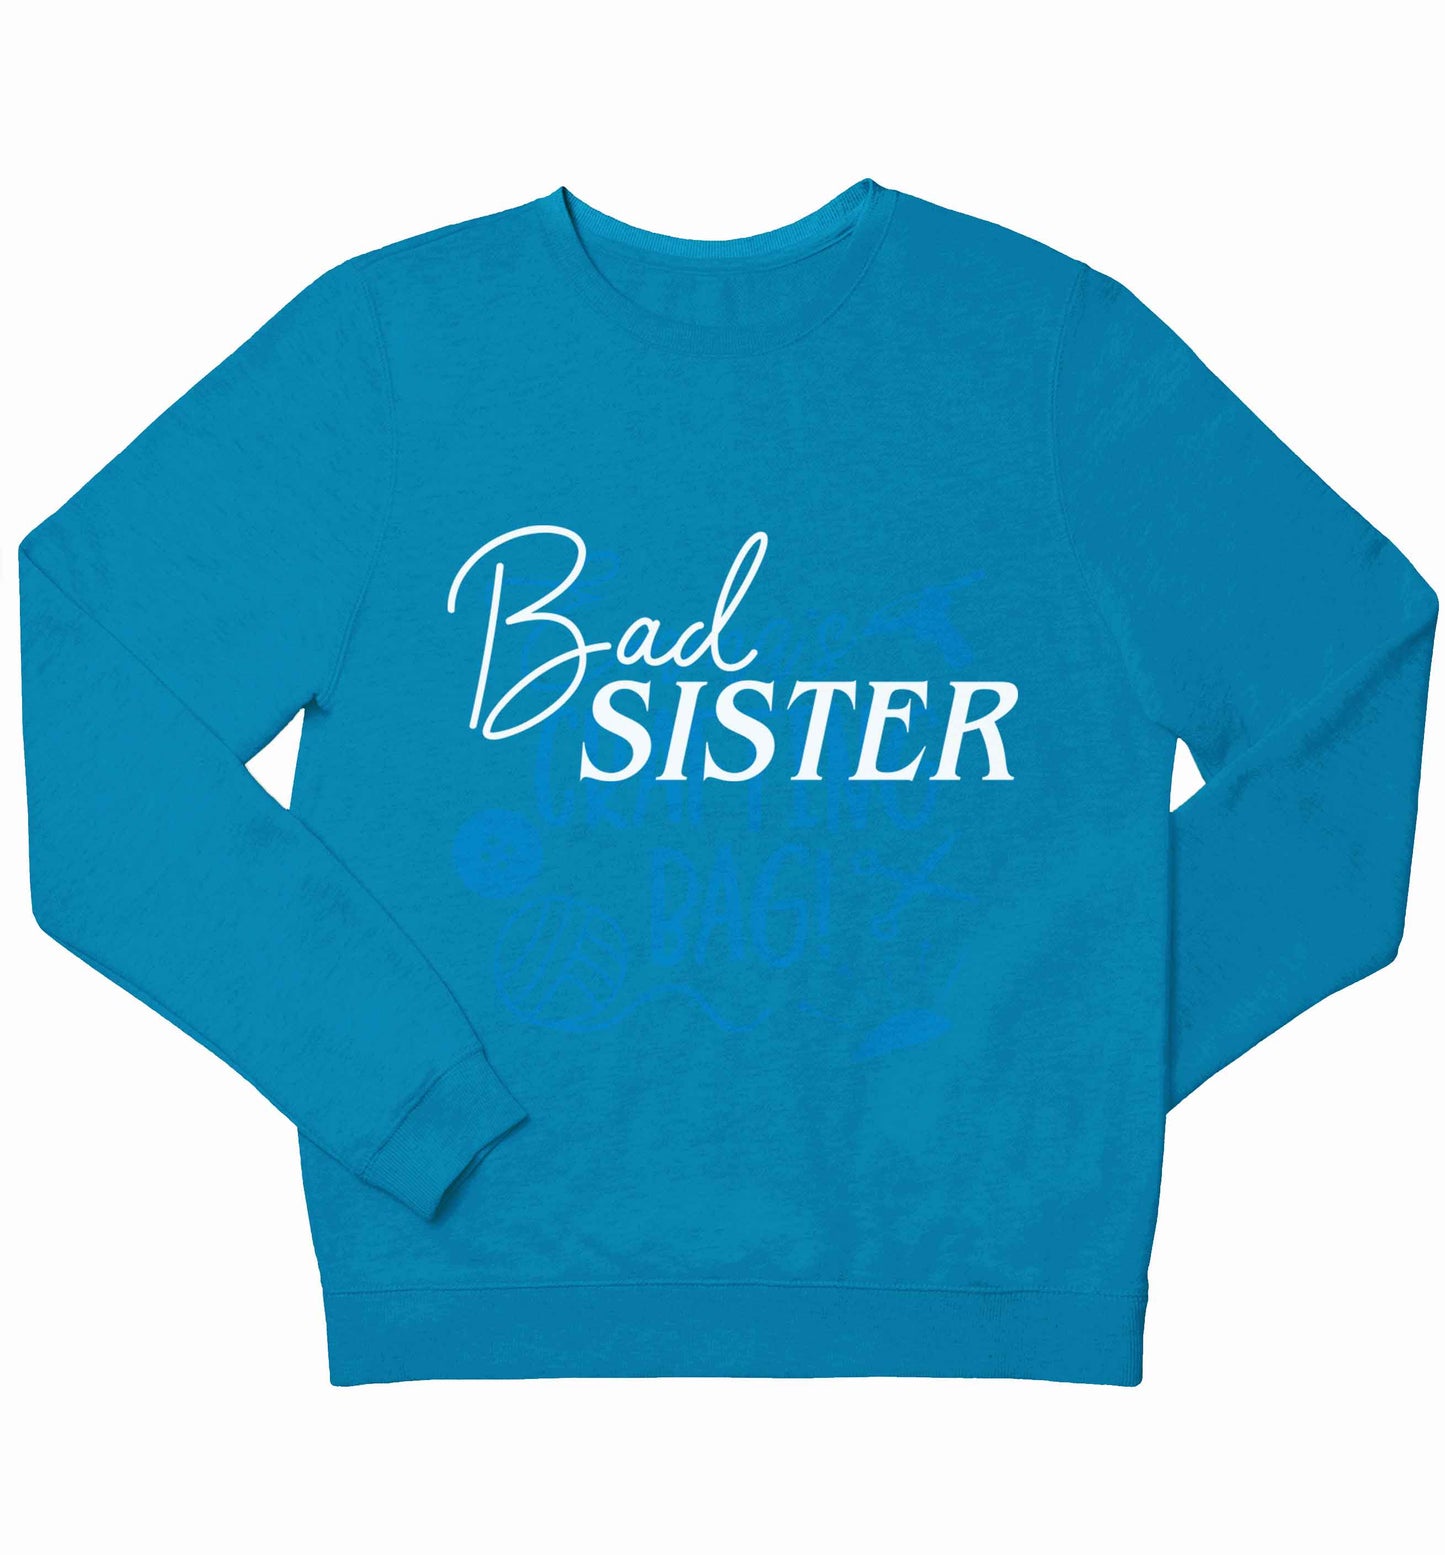 Bad sister children's blue sweater 12-13 Years